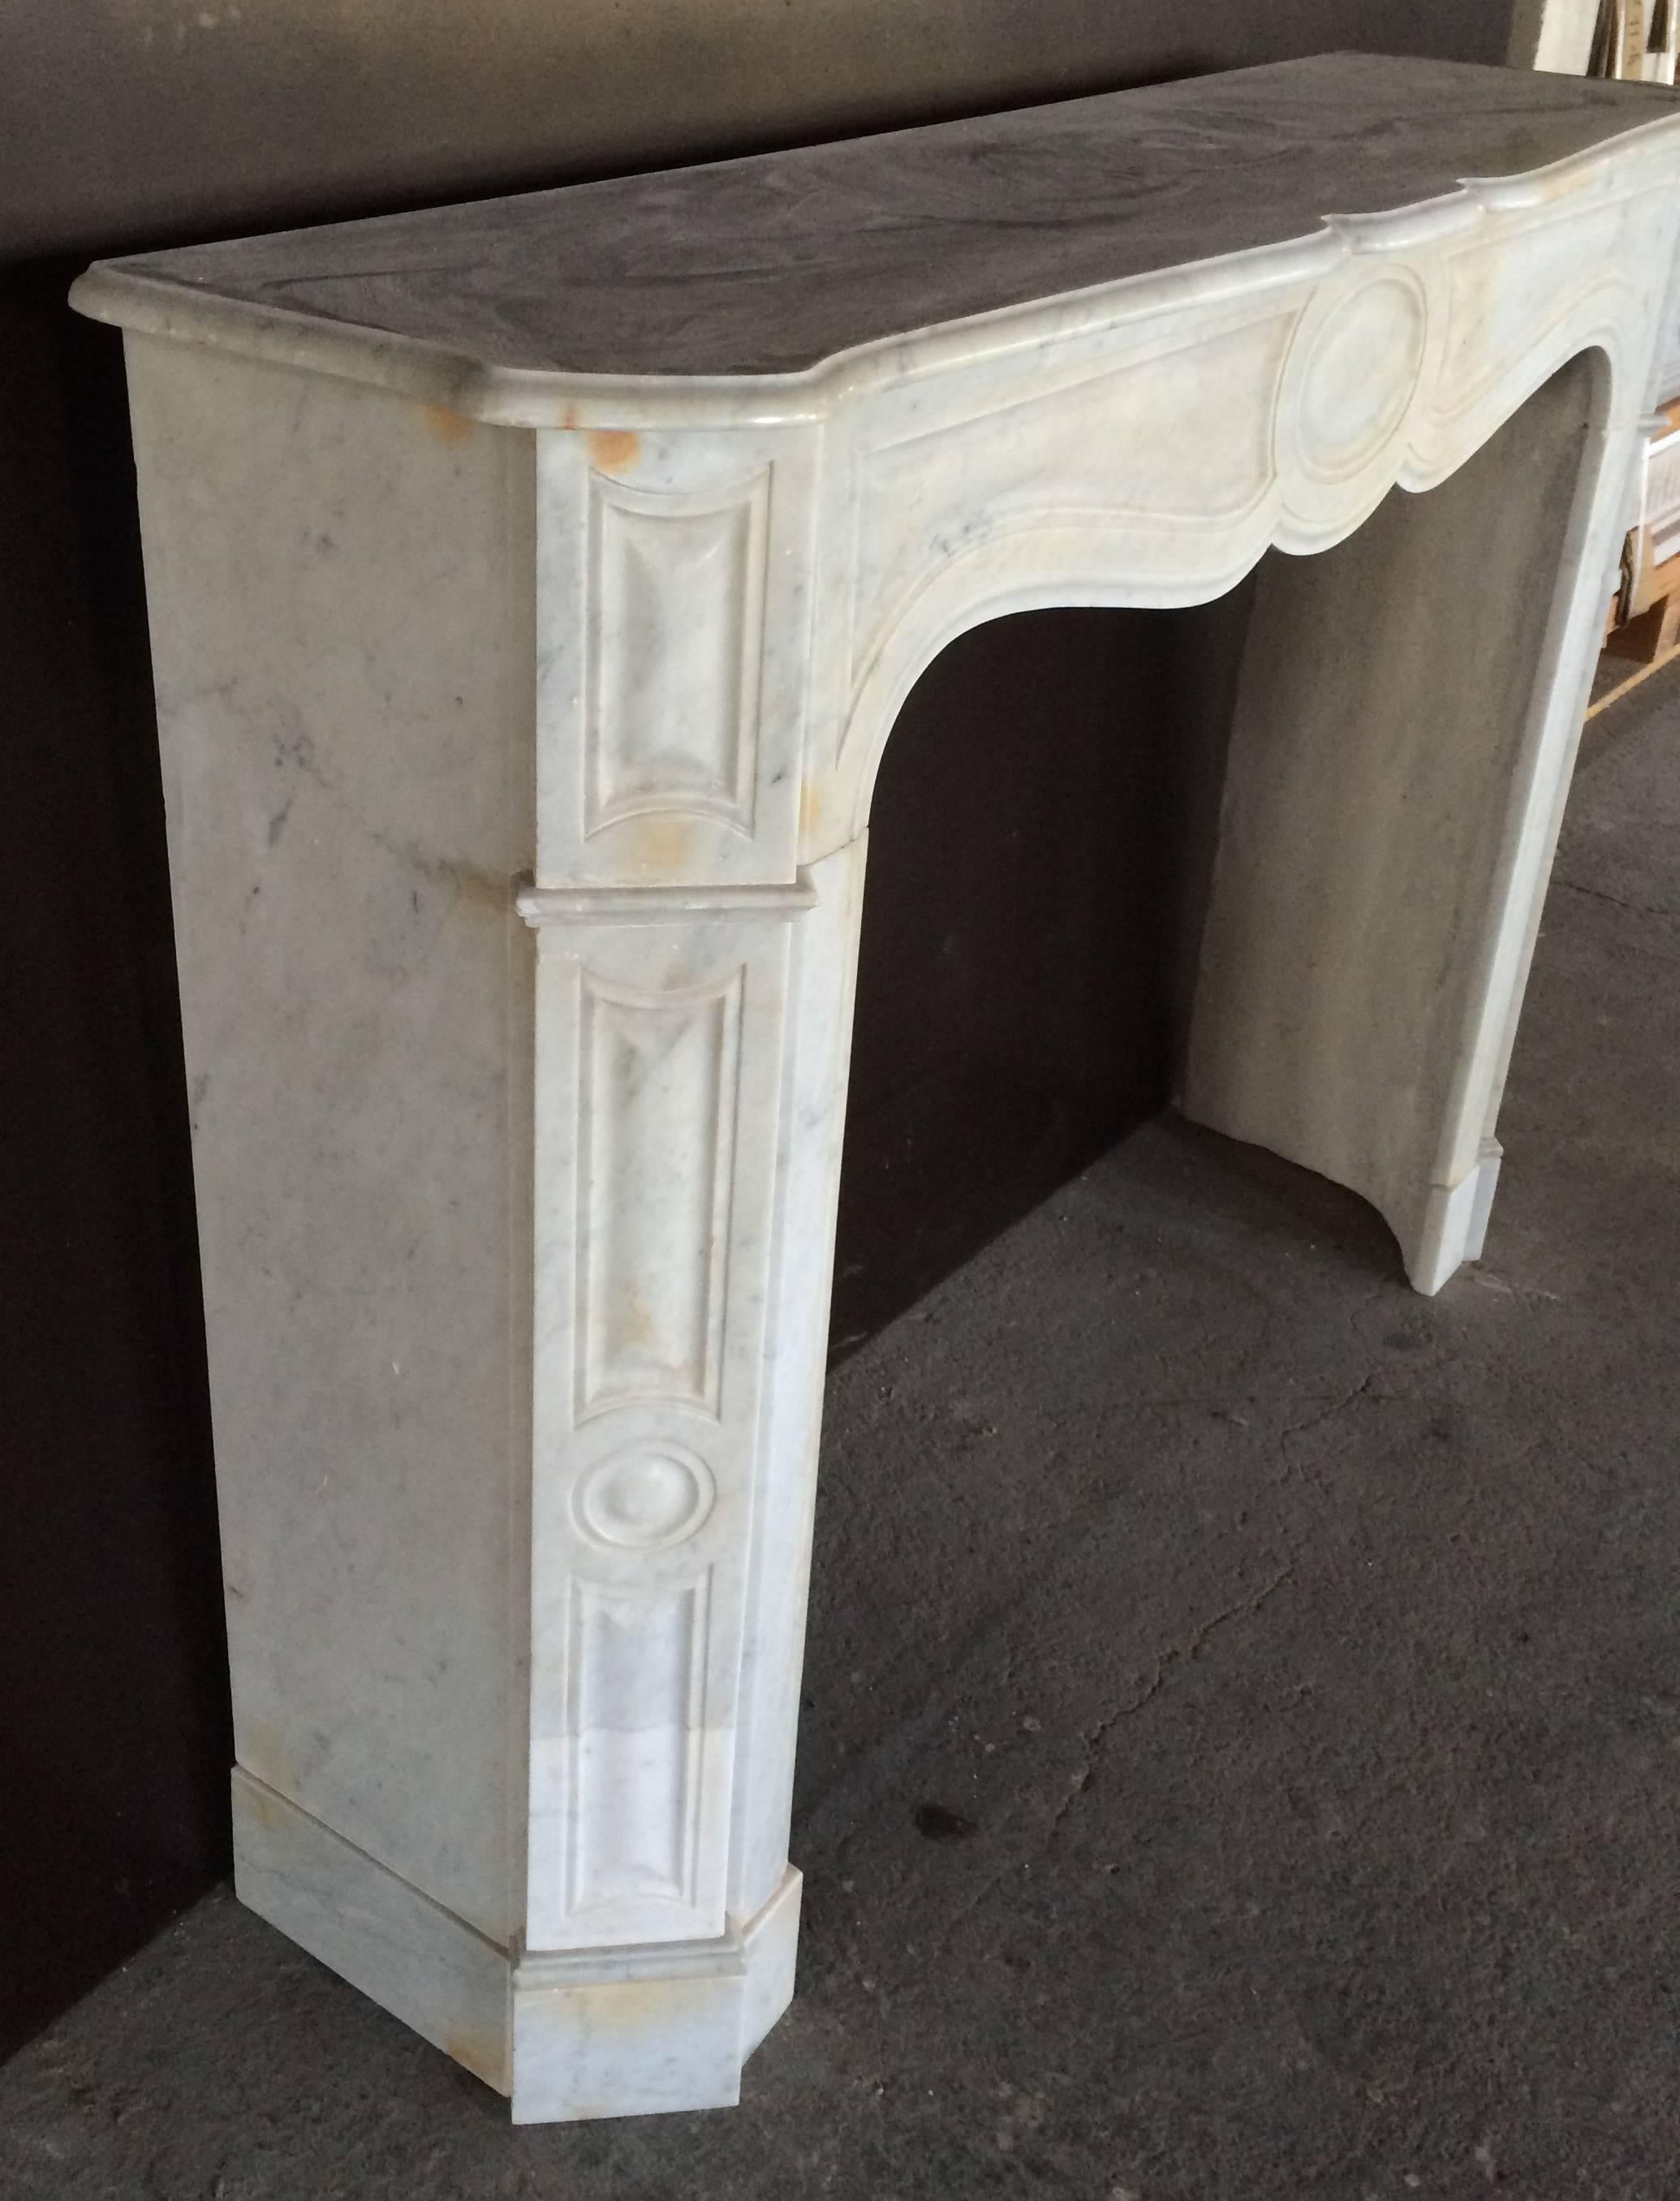 Classic, elegant, great quality, original 1800s from Paris, France.
Excellent condition, ready for installation right away.
Available right now.

Interior firebox dimensions:
Width 37.6 inches,
High 30.52 inches.

More info on